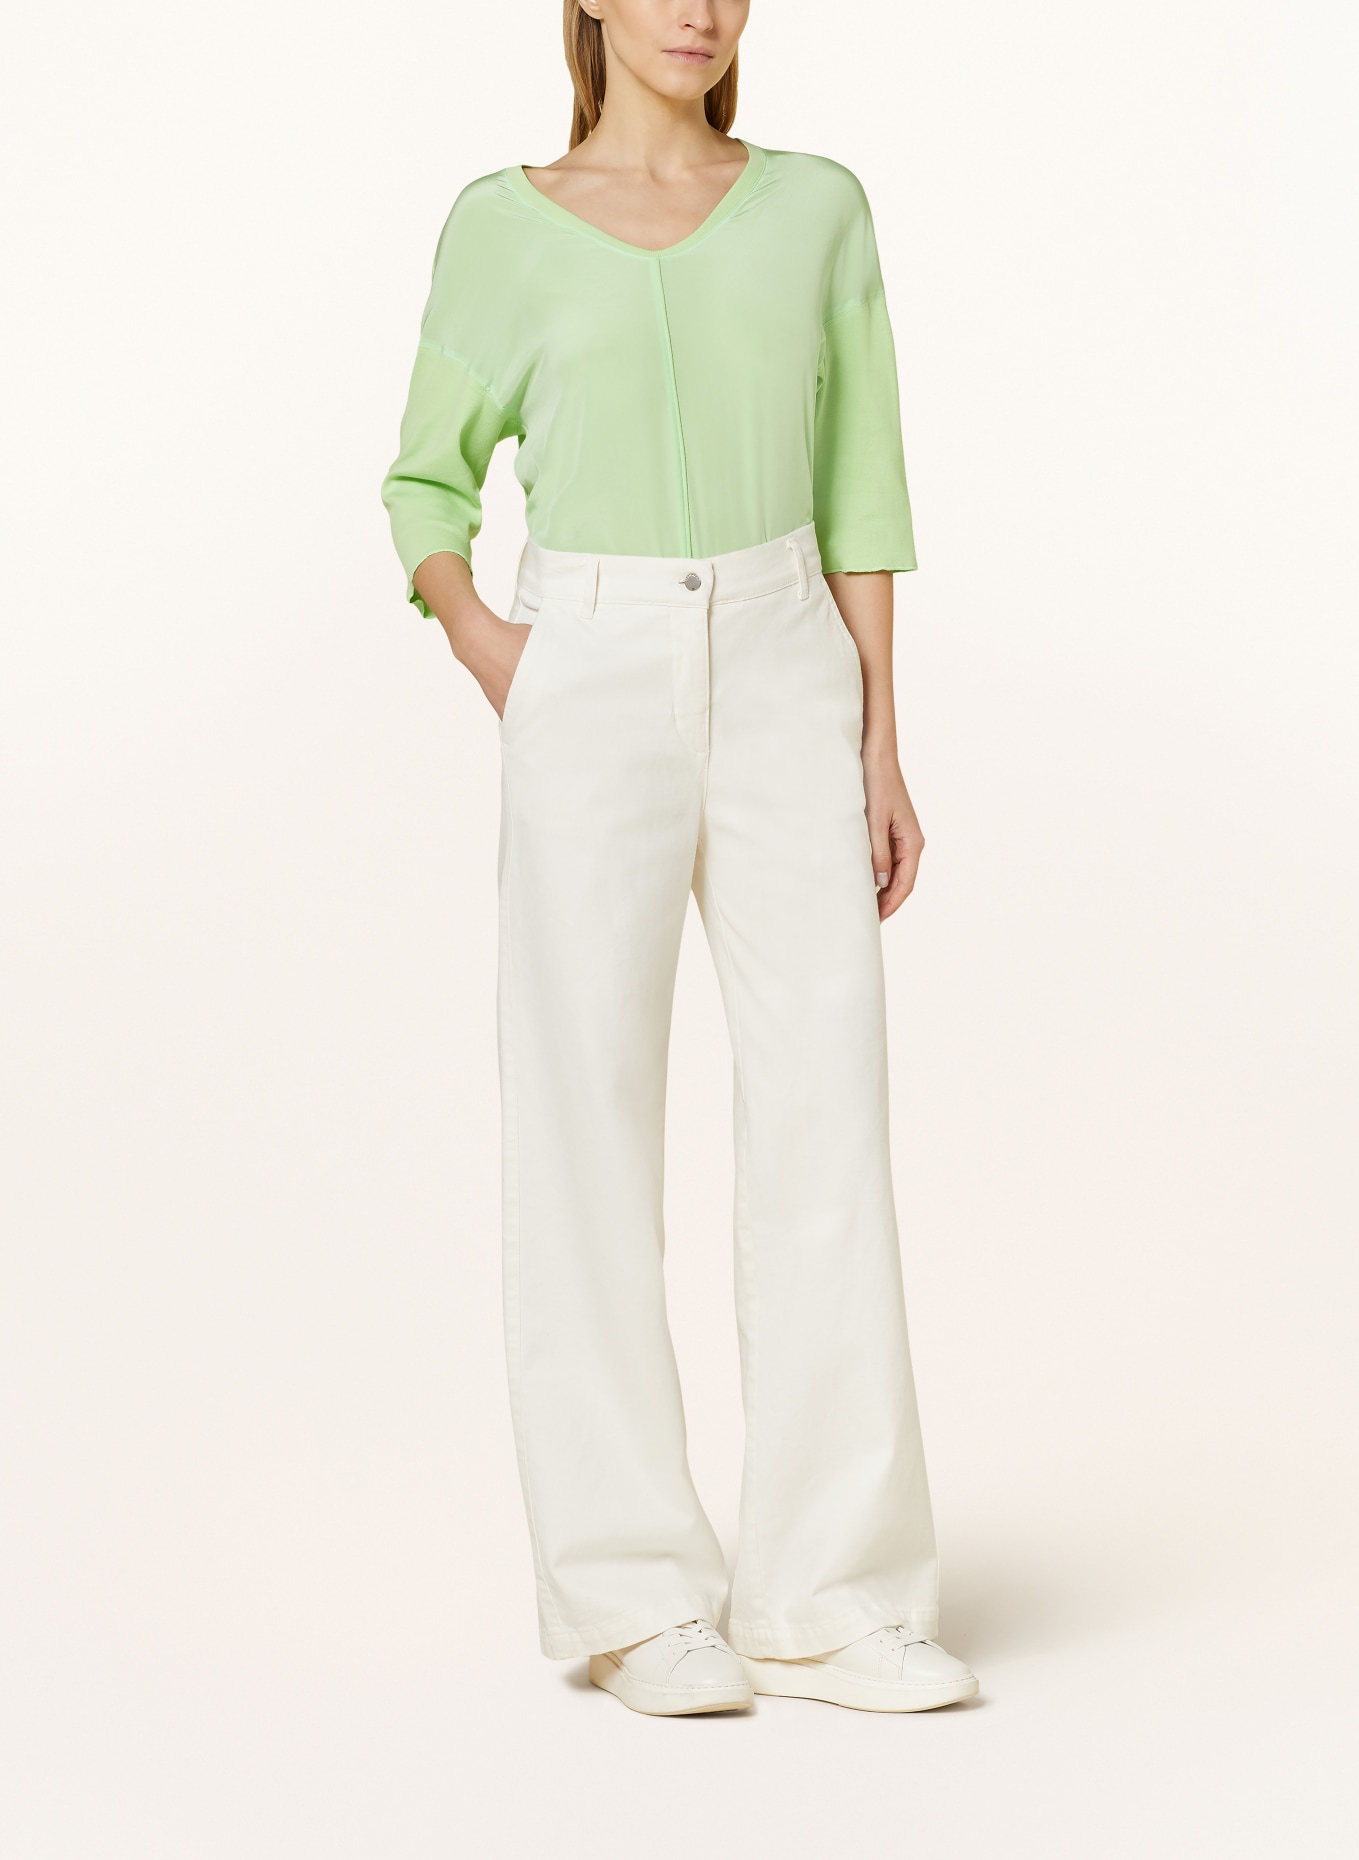 MARC CAIN Shirt blouse in mixed materials, Color: 531 light apple green (Image 2)